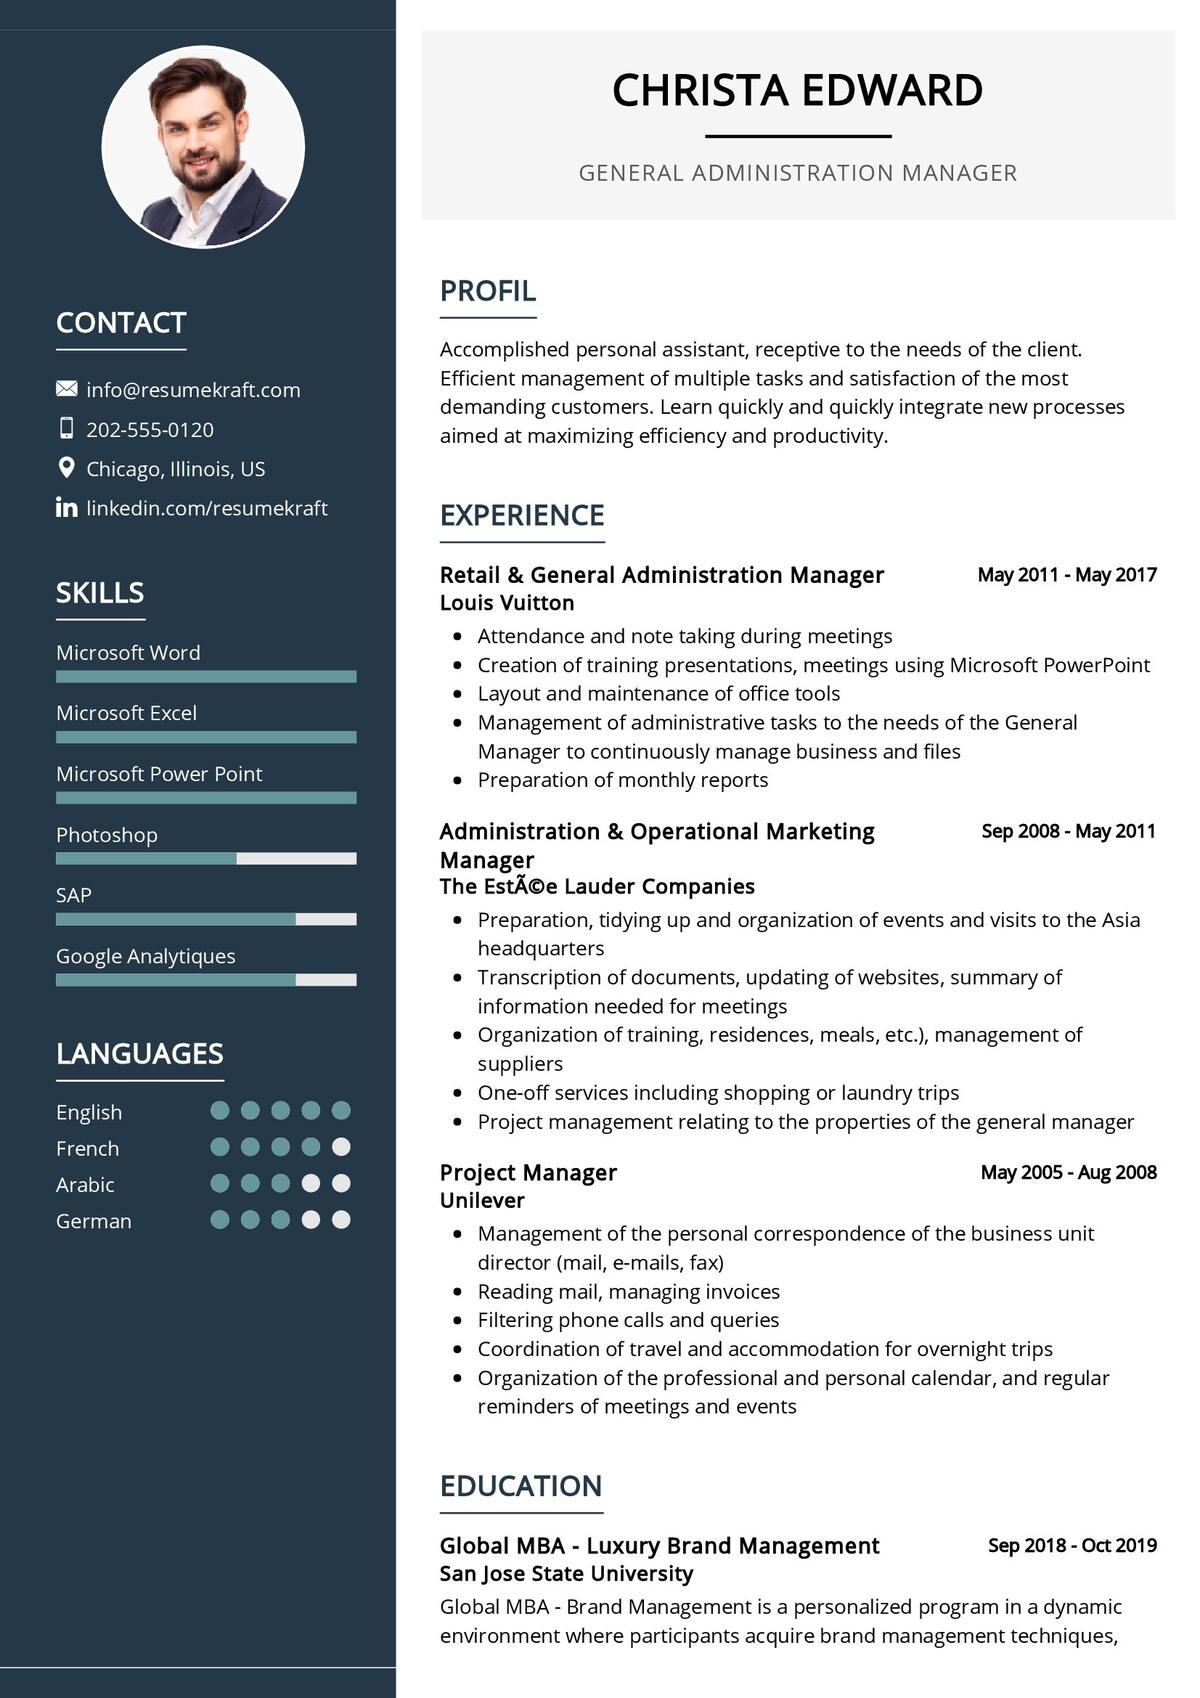 General Administration Manager CV Template 